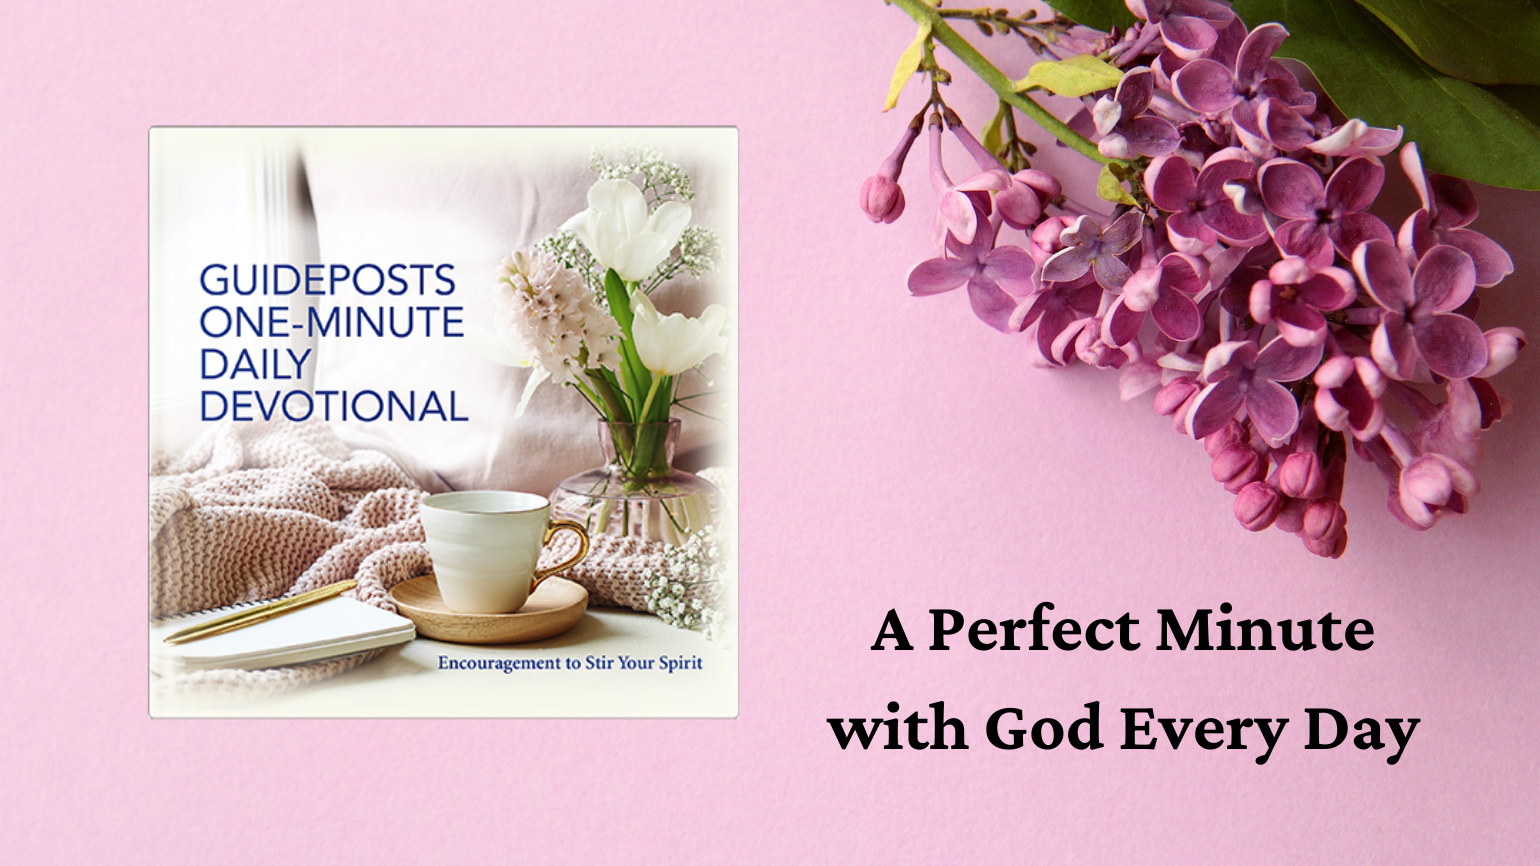 One Minute Daily Devotional (Guideposts) spiritual faith based mothers day gifts